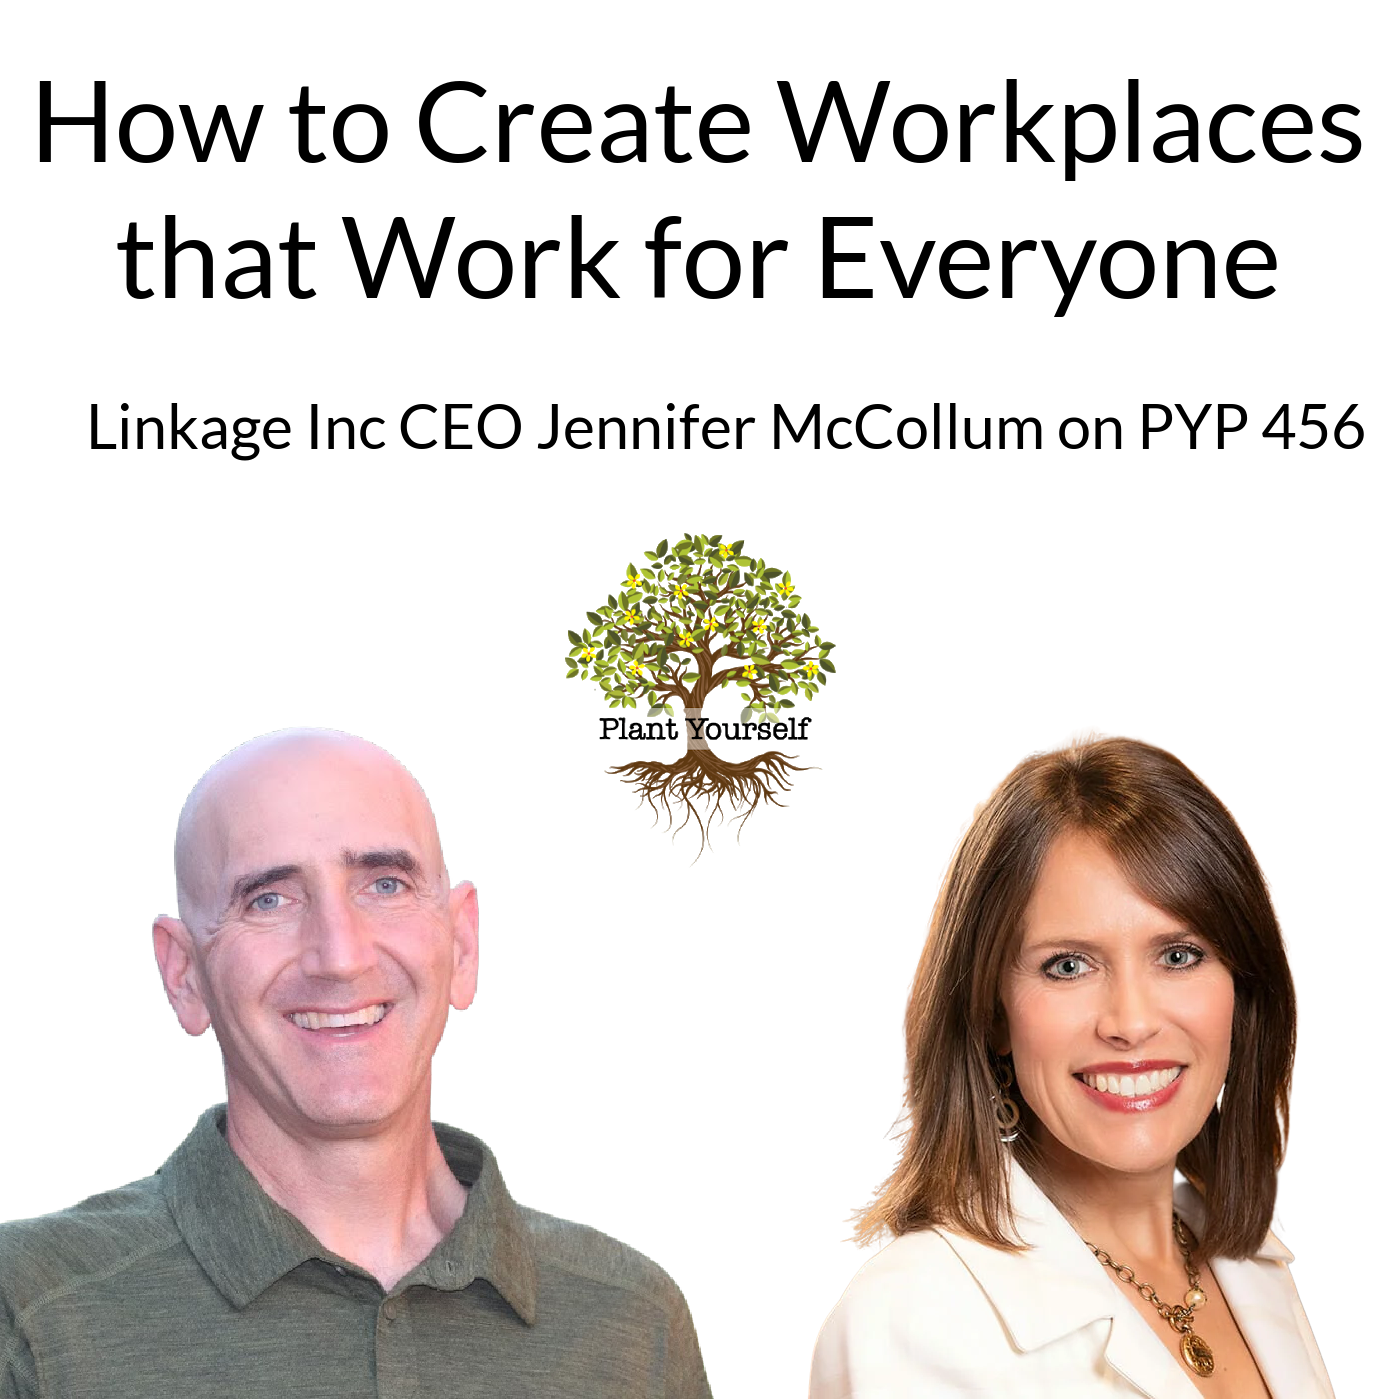 From Diversity to Belonging: How to Create Workplaces that Work for Everyone: Jennifer McCollum of Linkage, Inc. on PYP 456